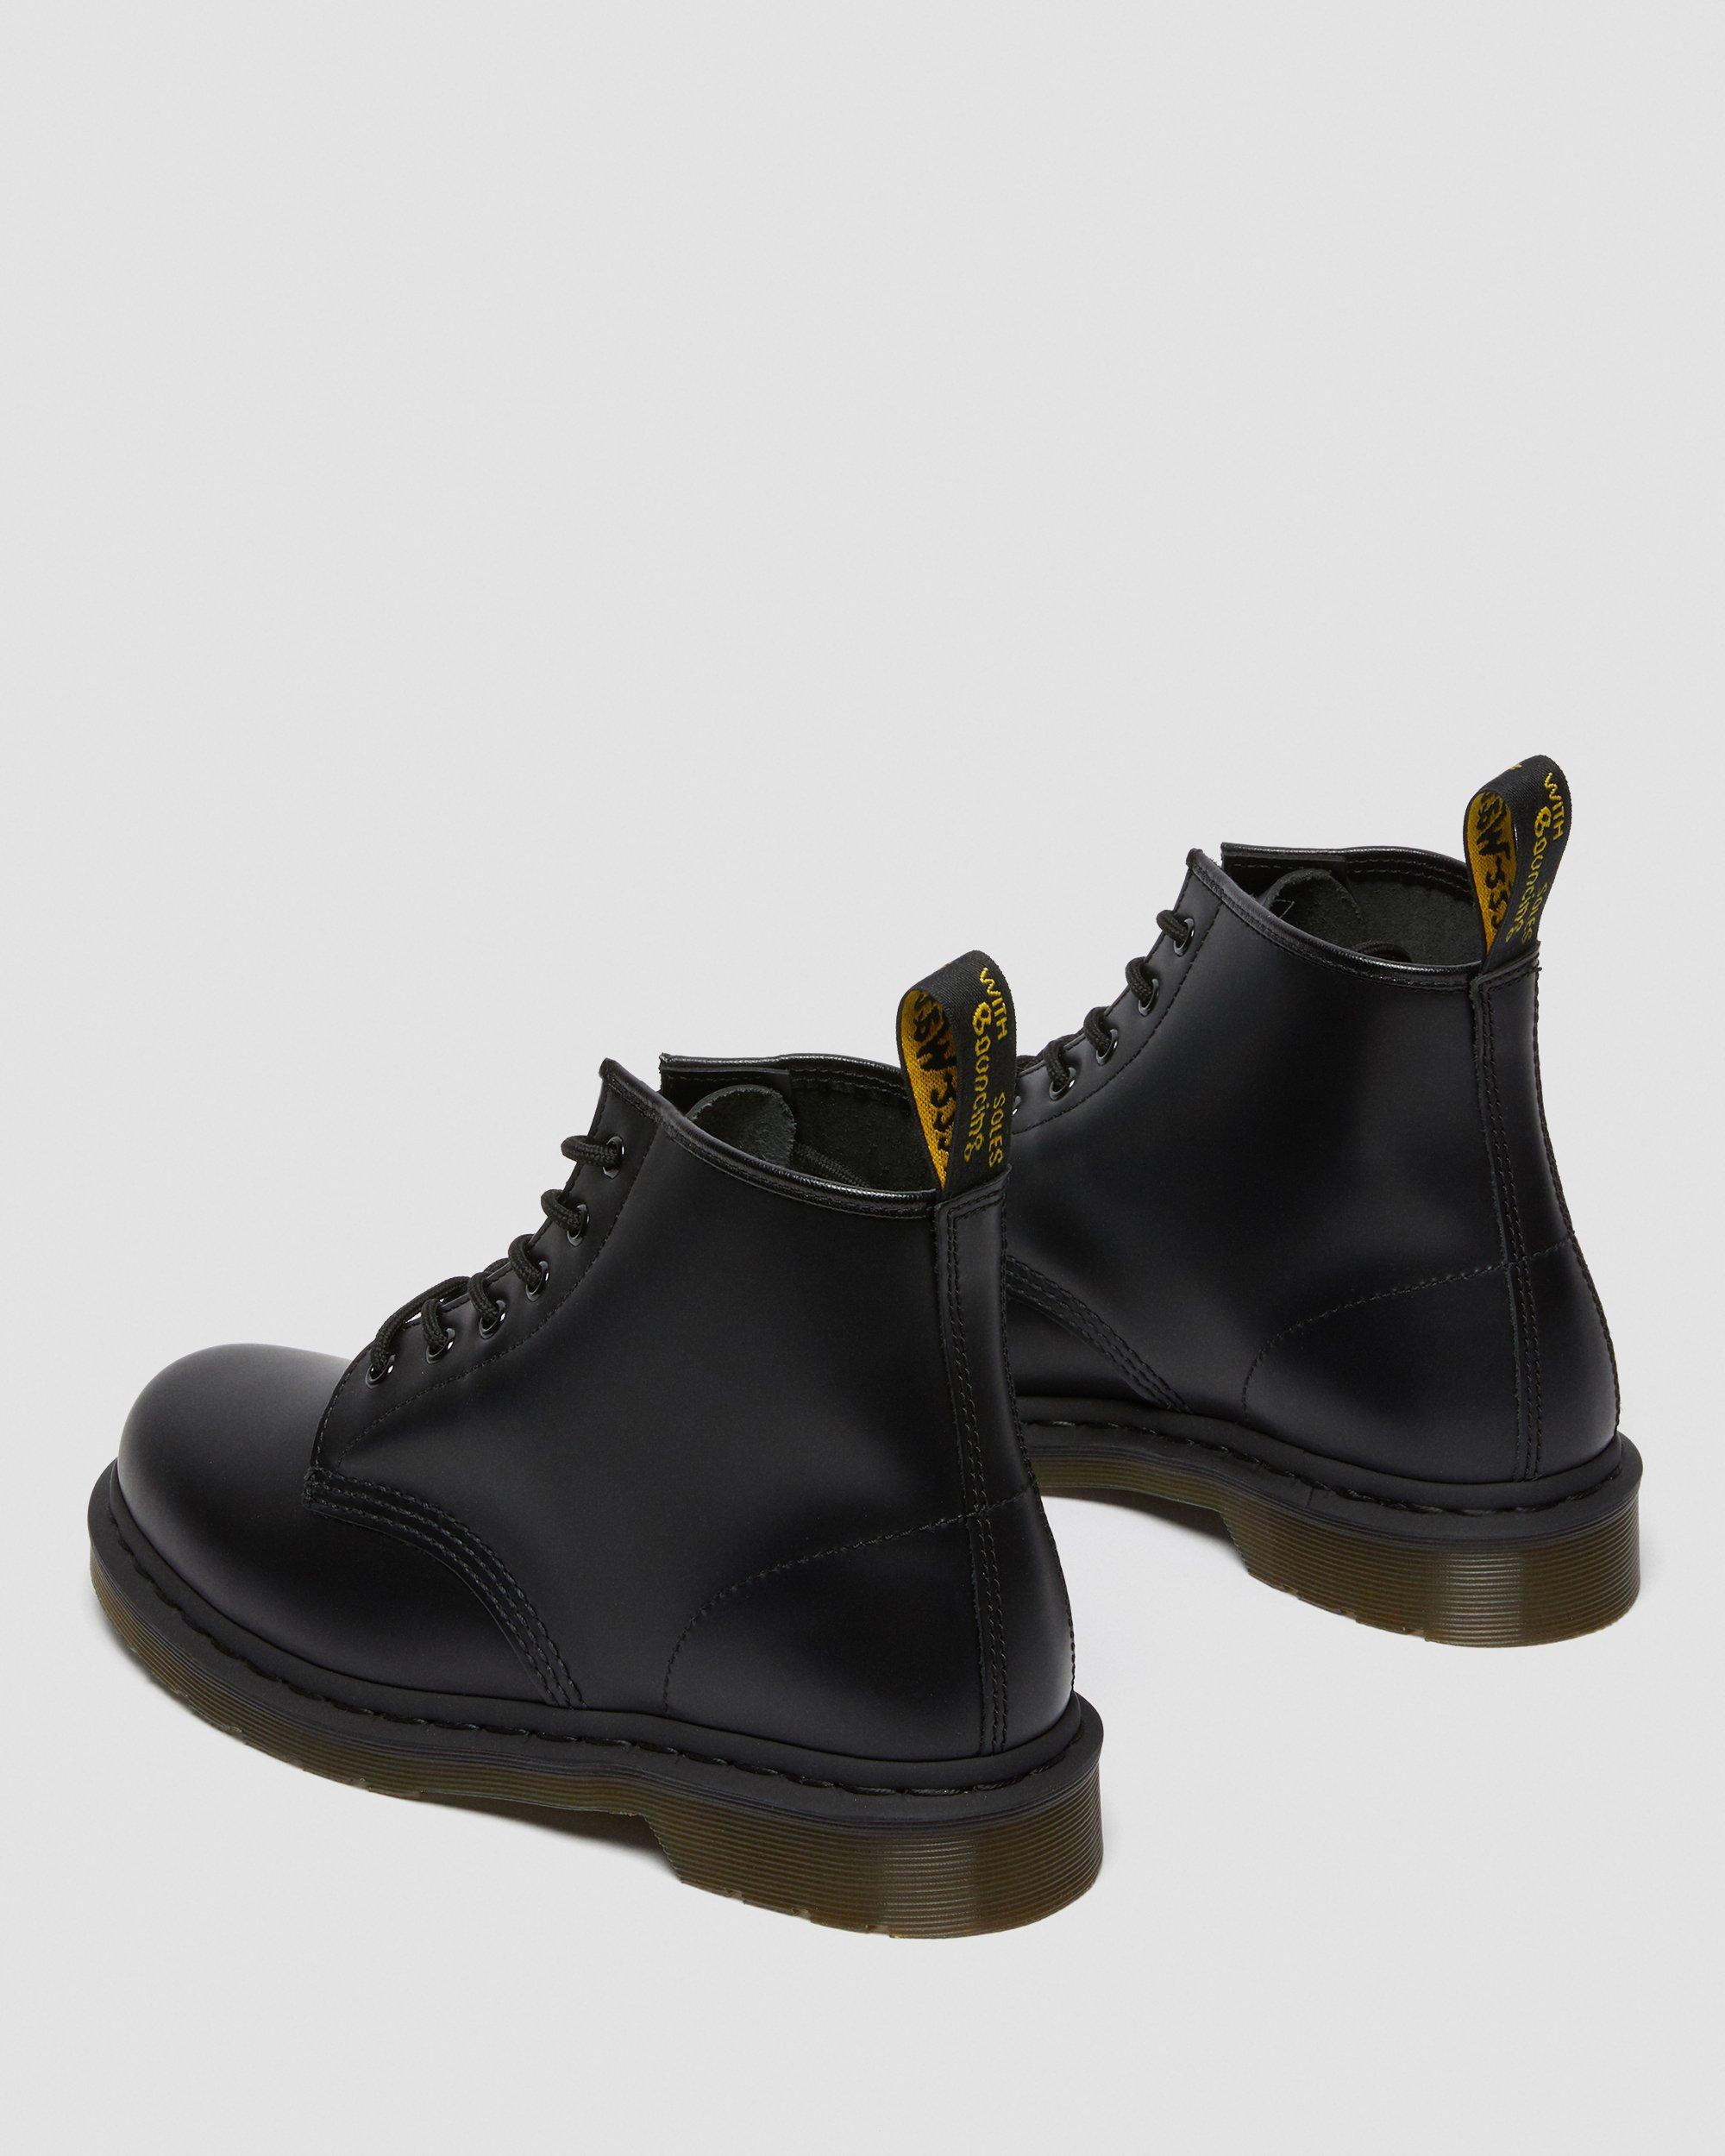 101 SMOOTH LEATHER ANKLE BOOTS | Dr. Martens